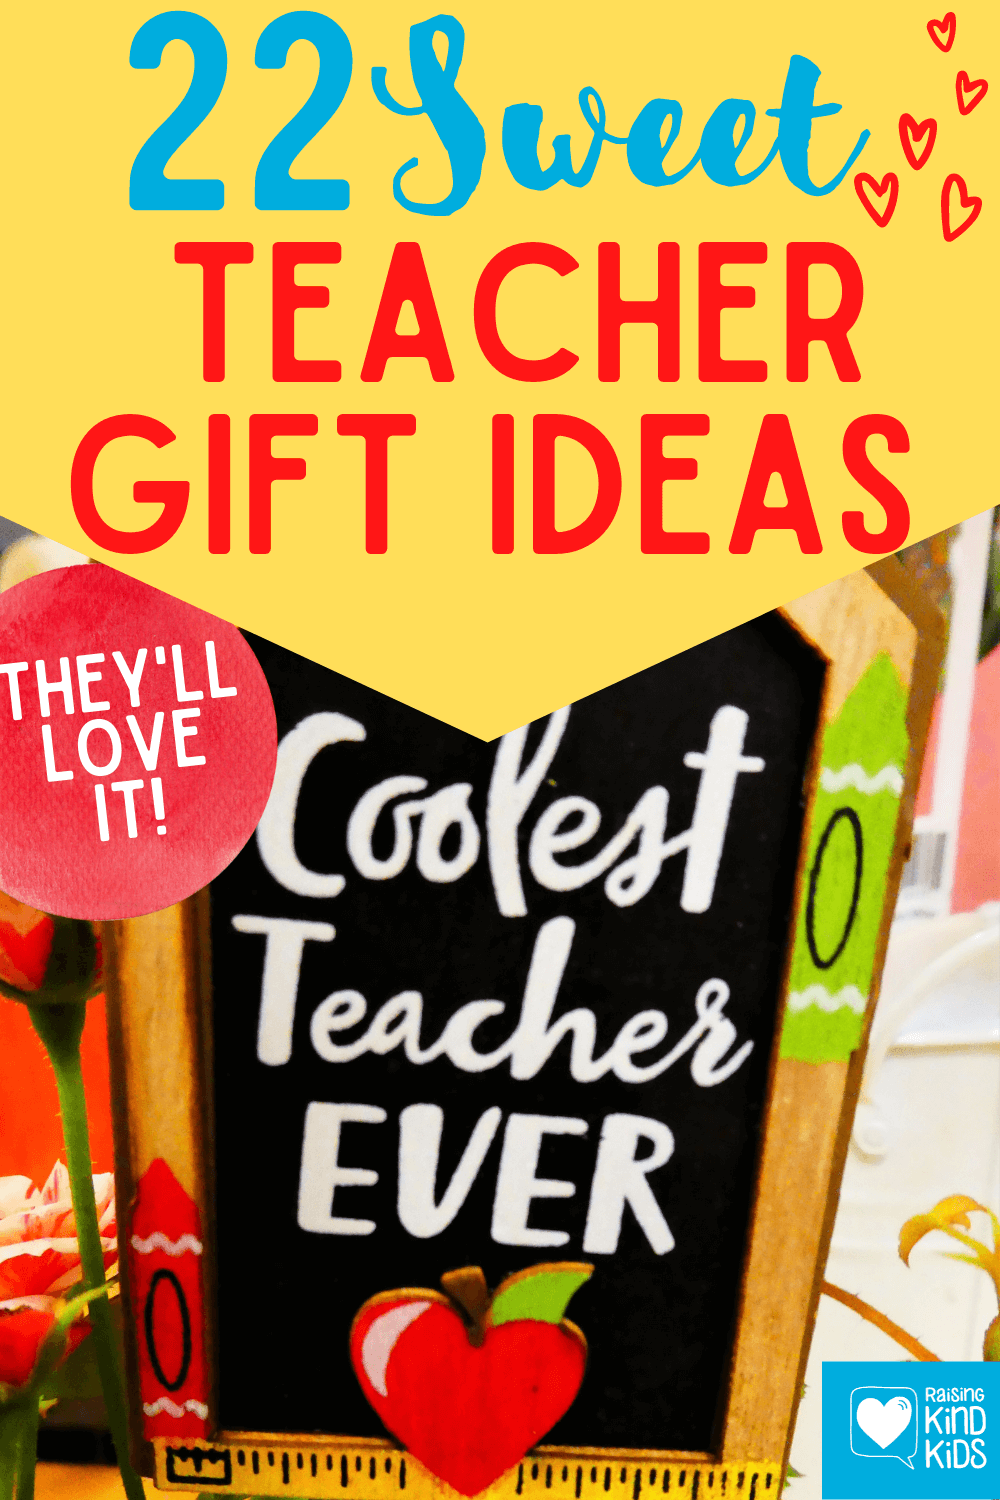 For teacher appreciation gift ideas, try one of these 22 sweet and thoughtful gift ideas to let your child's teacher know how much you value them. #teacherappreciation #thankateacher #teachergiftideas #giftguides #giftideas #teachergifts #coffeeandcarpool #freeprintable 